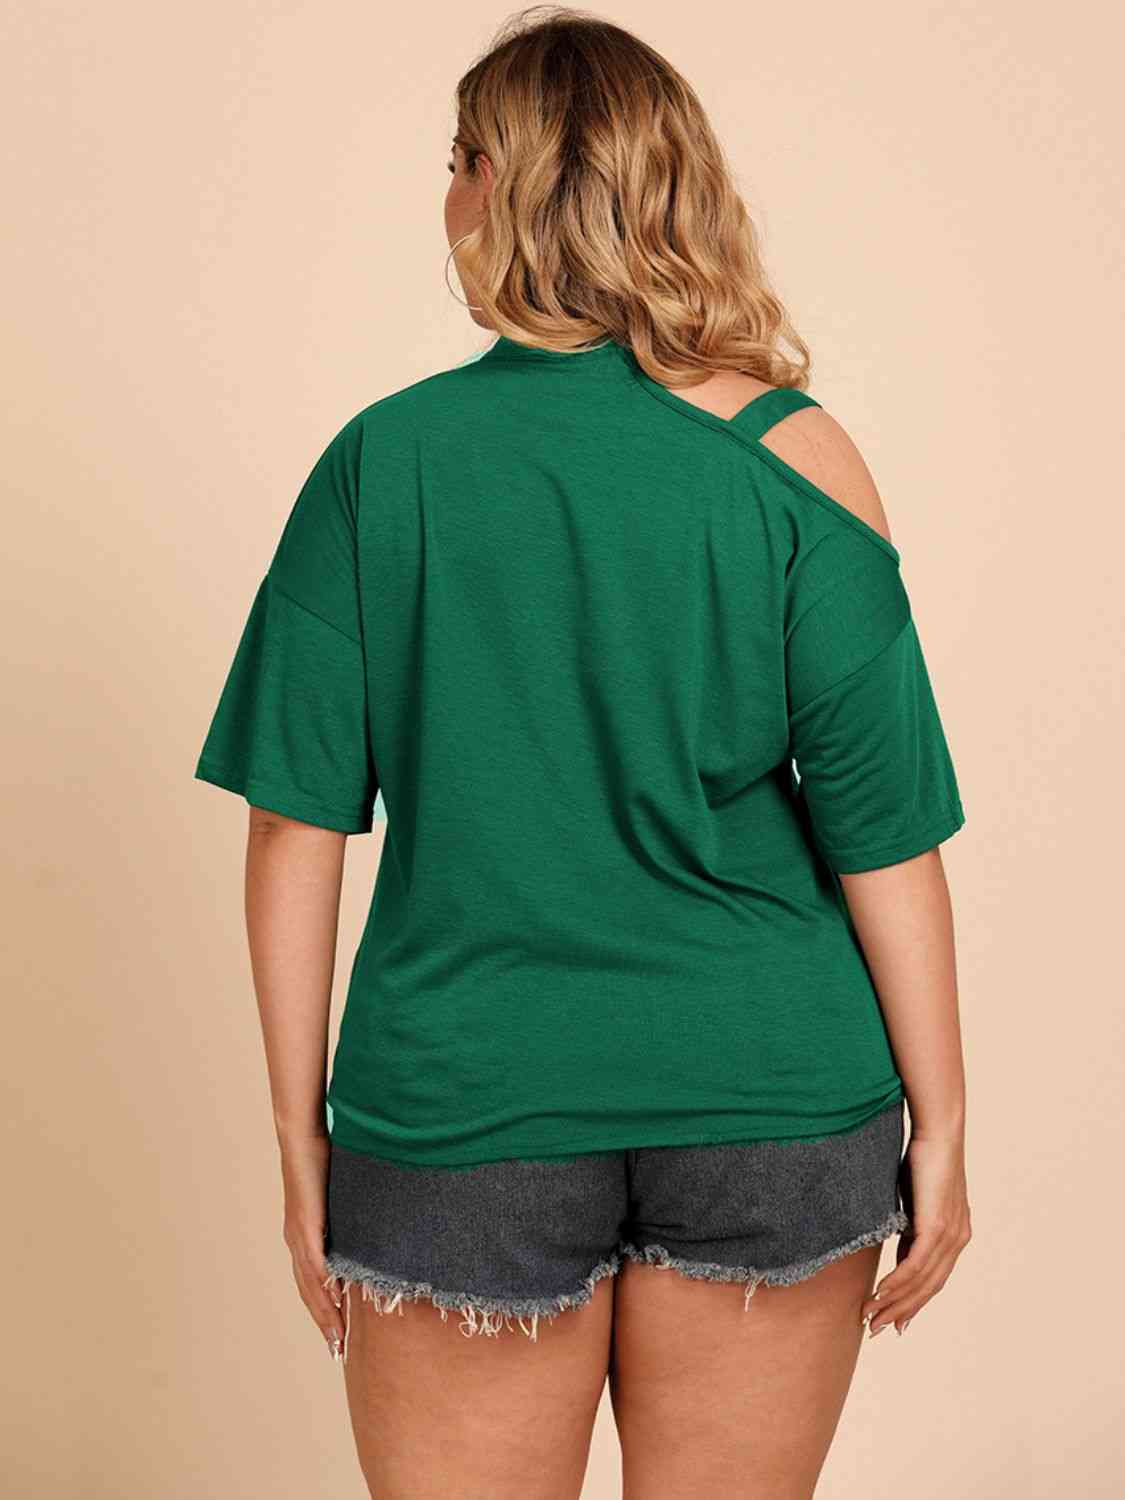 Plus Size Tied Cold-Shoulder Tee Shirt - Just Enuff Sexy